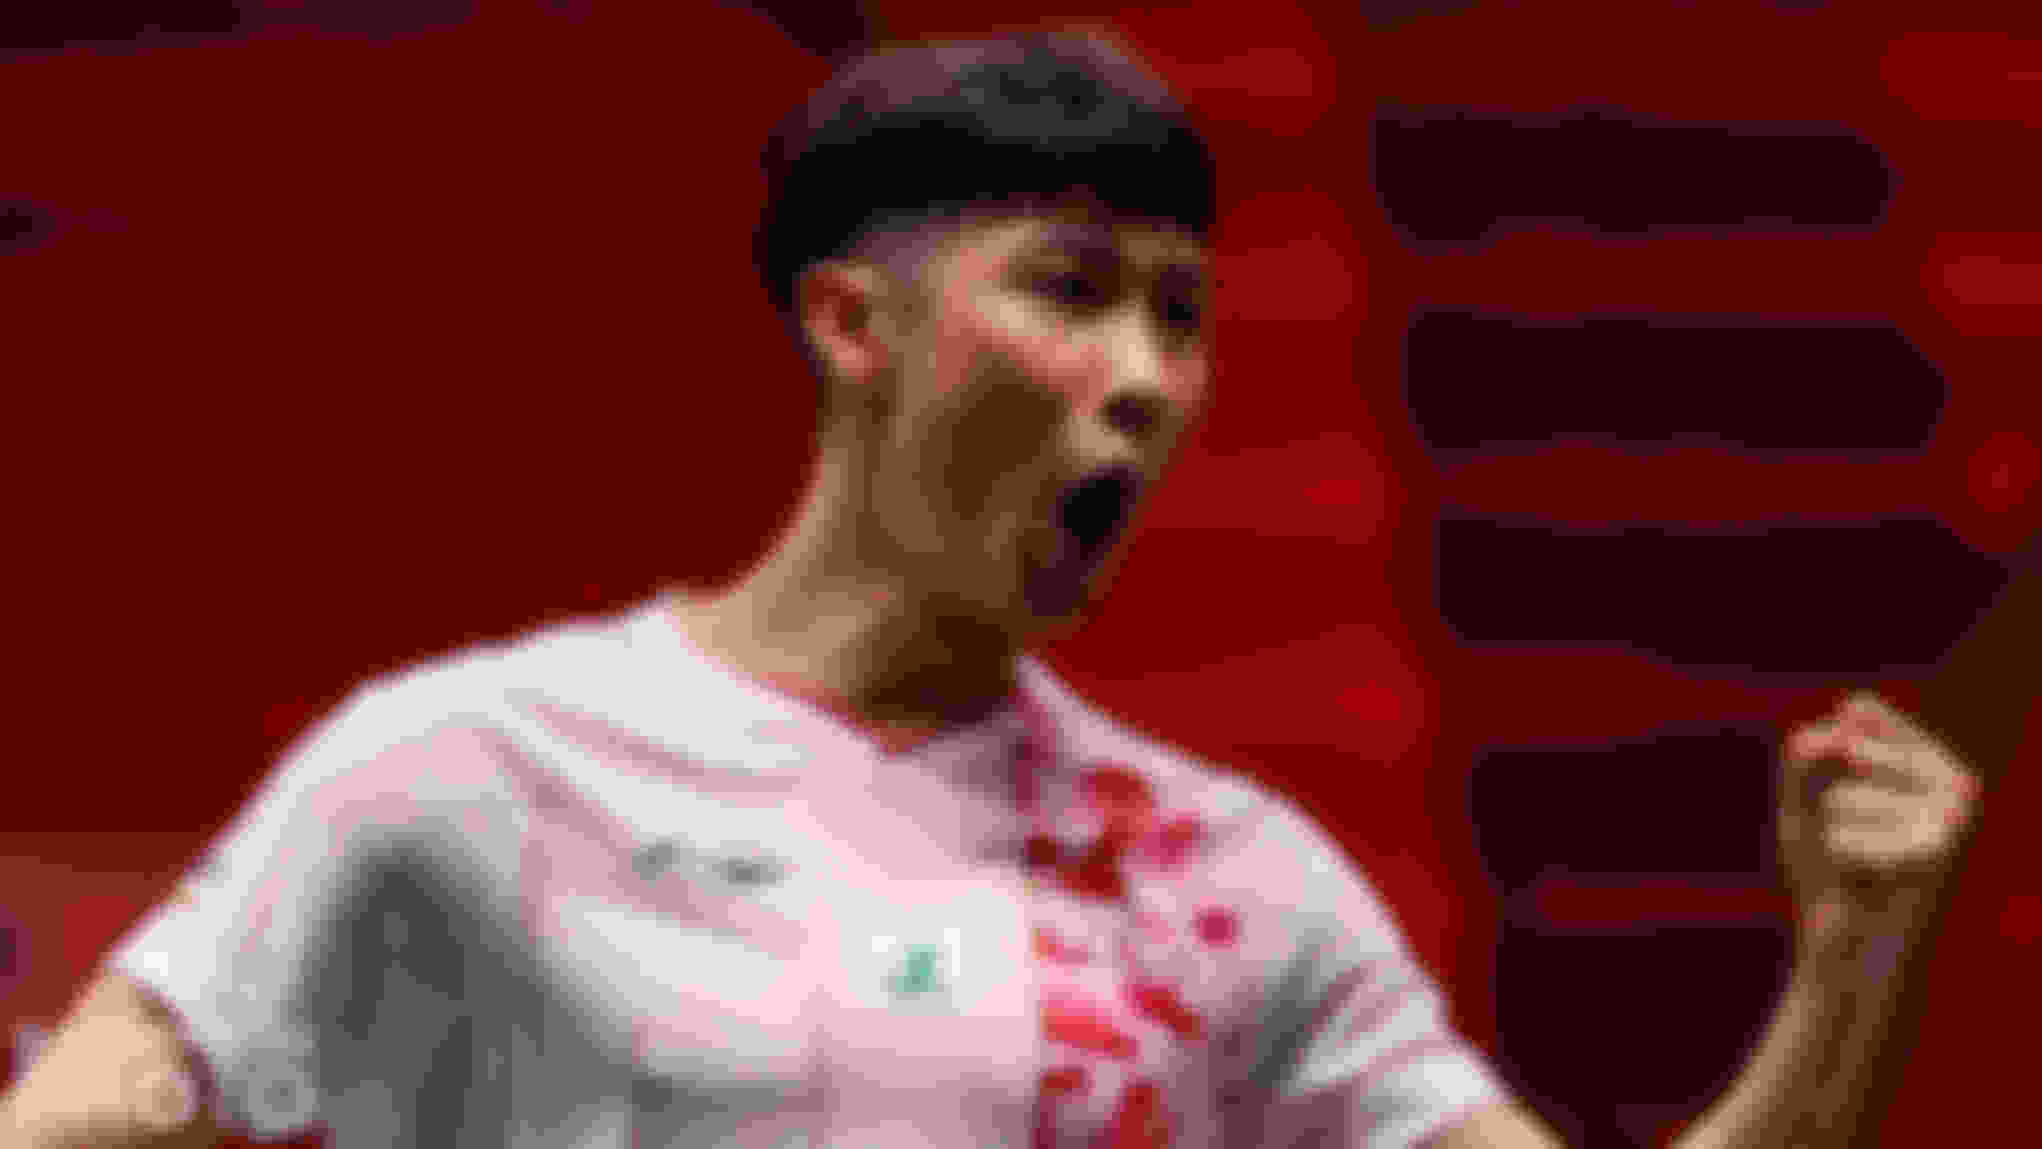 Lovin' it: Loh Kean Yew produced a strong win over the tenacious Chou Tien Chen to start his Tour Finals campaign.